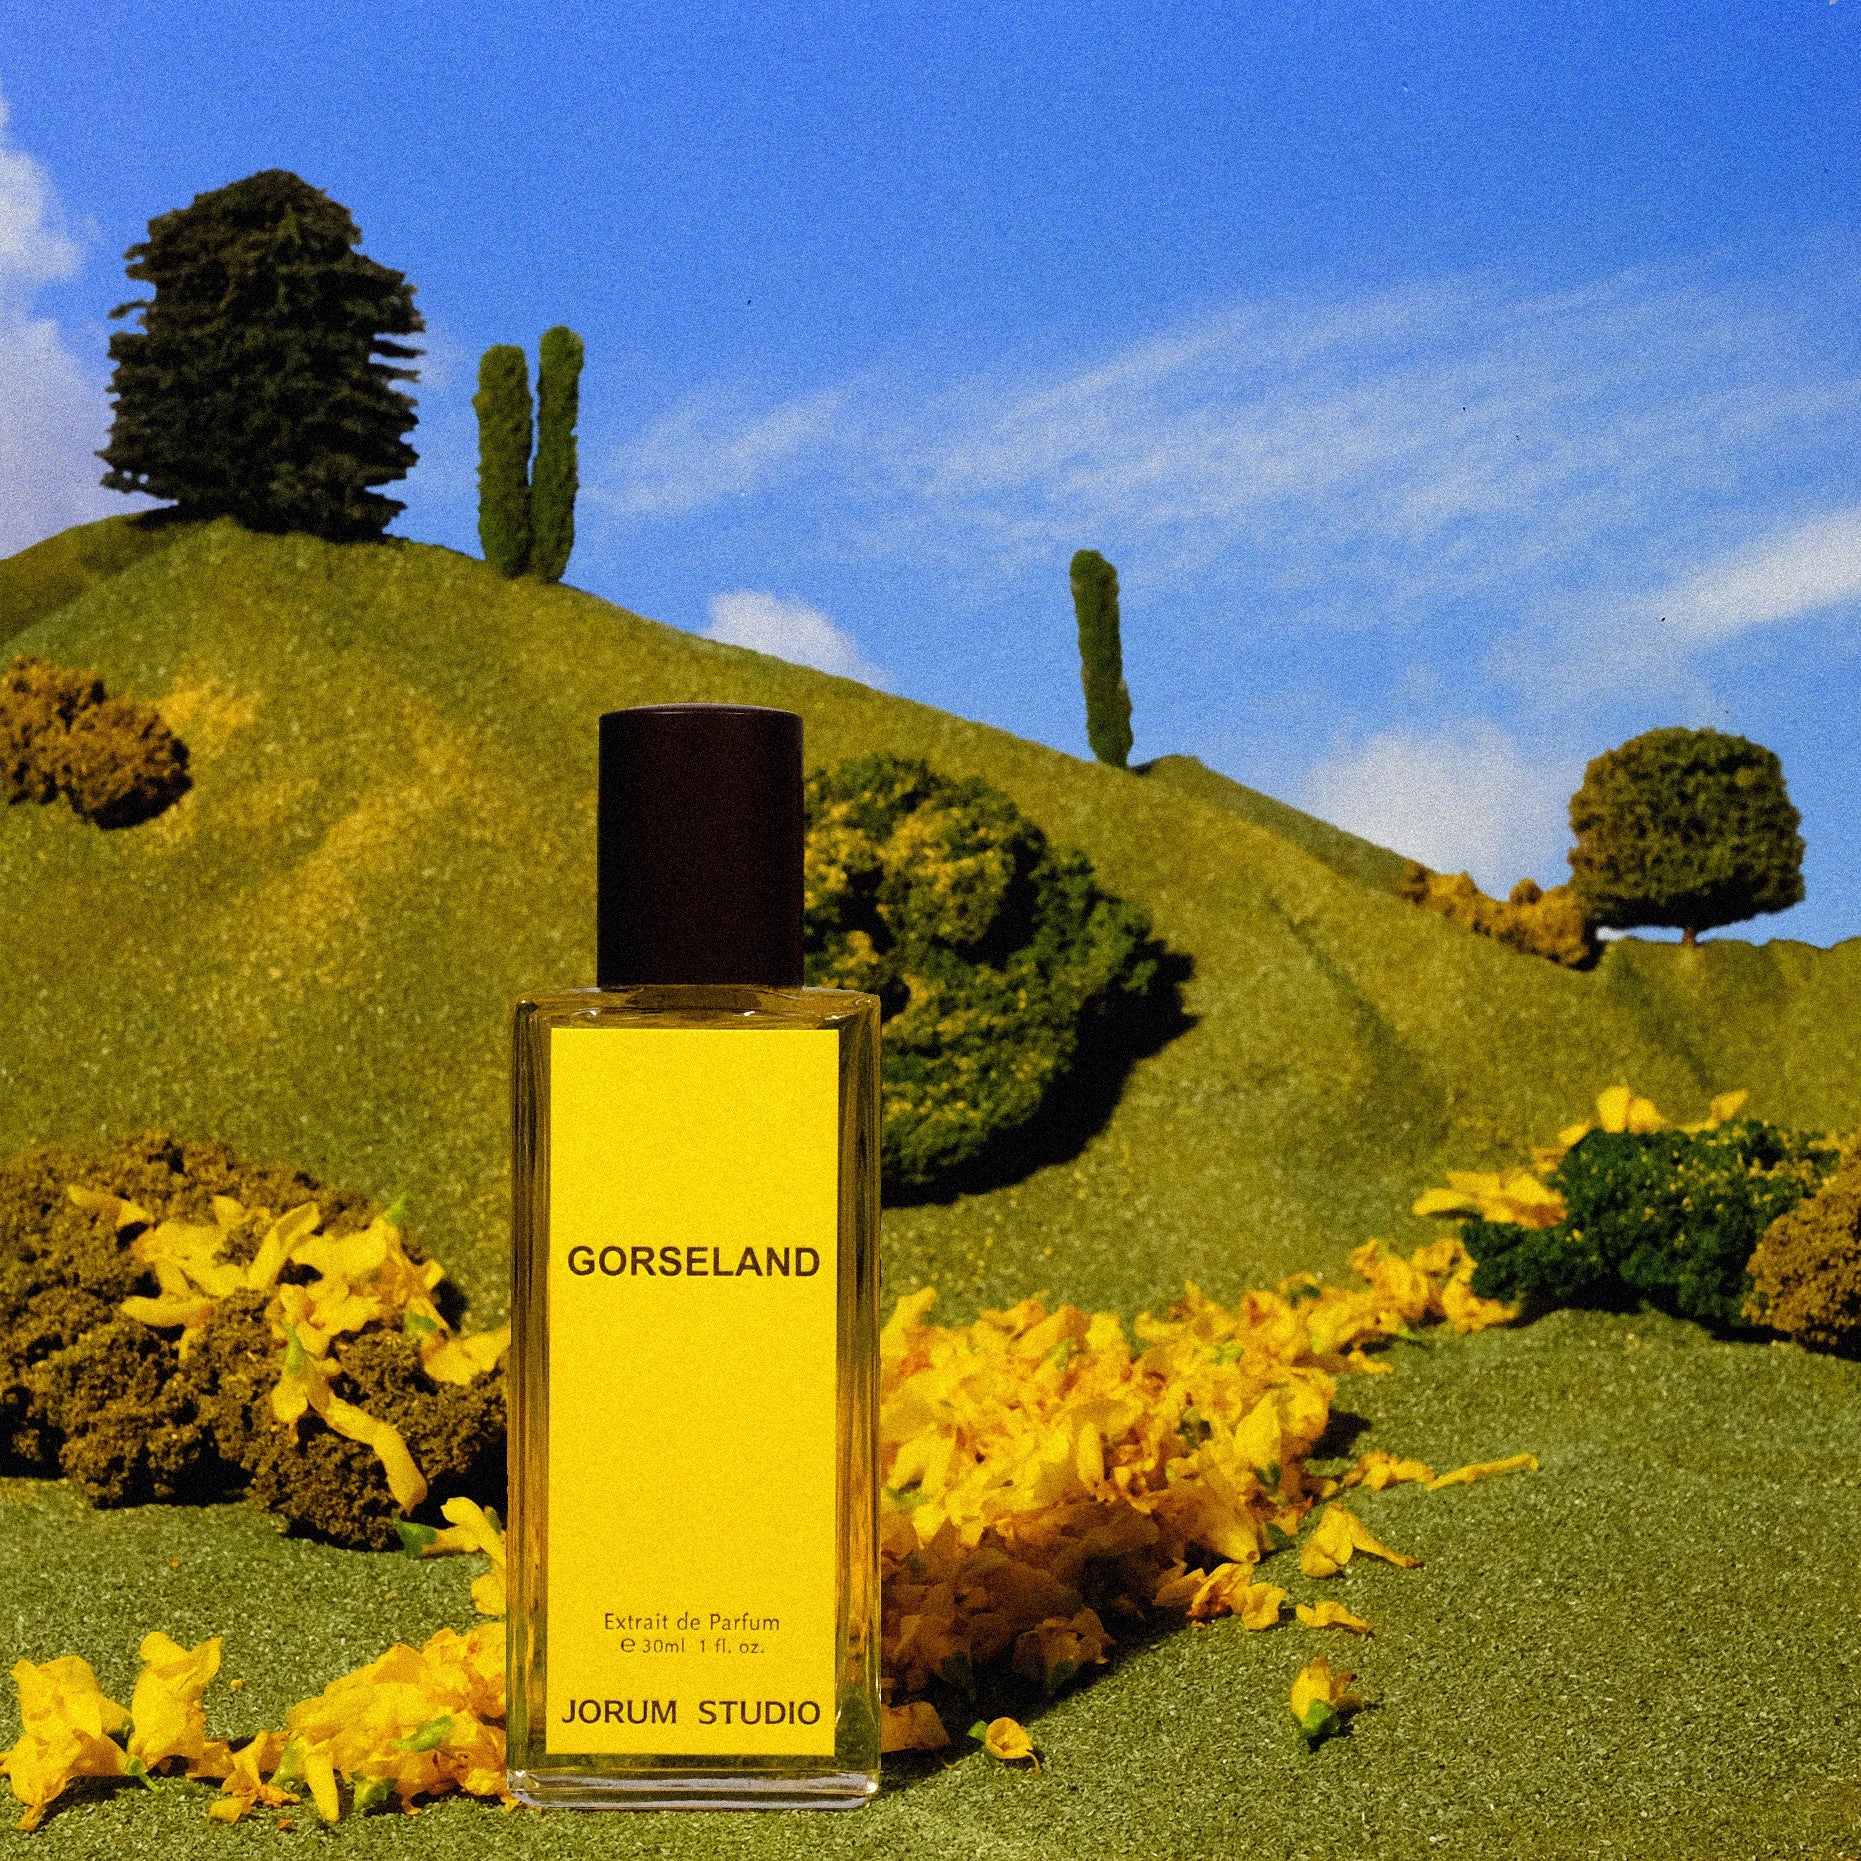 Bottle of Jorum Studio Gorseland perfume superimposed on a small scale model hill with model trees and scattered gorse petals